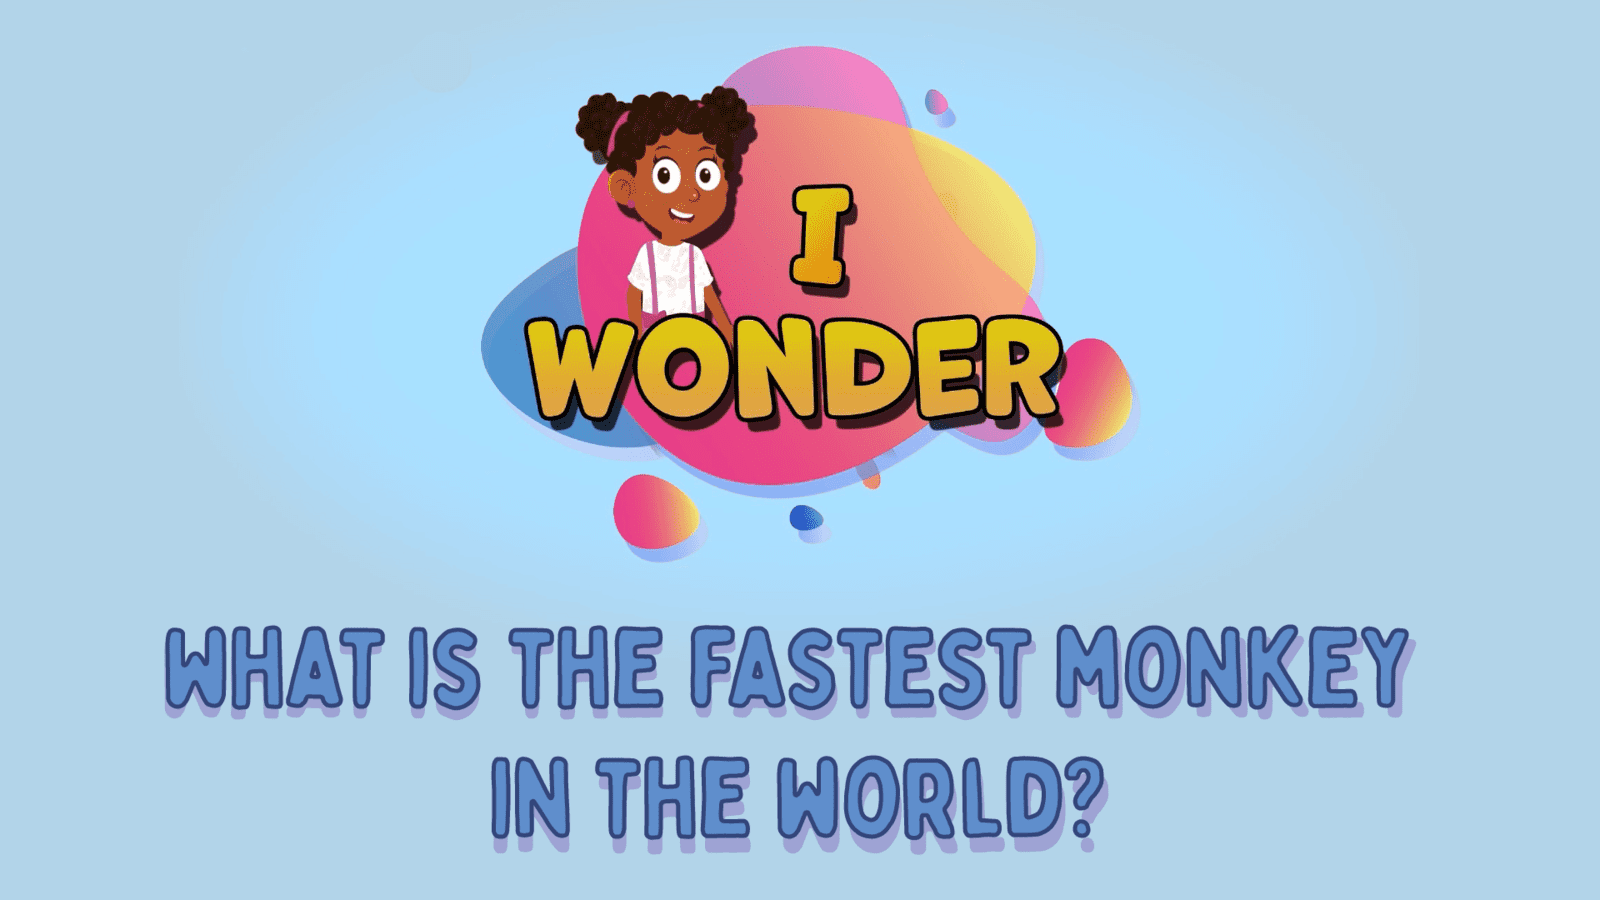 What Is The Fastest Monkey In The World?